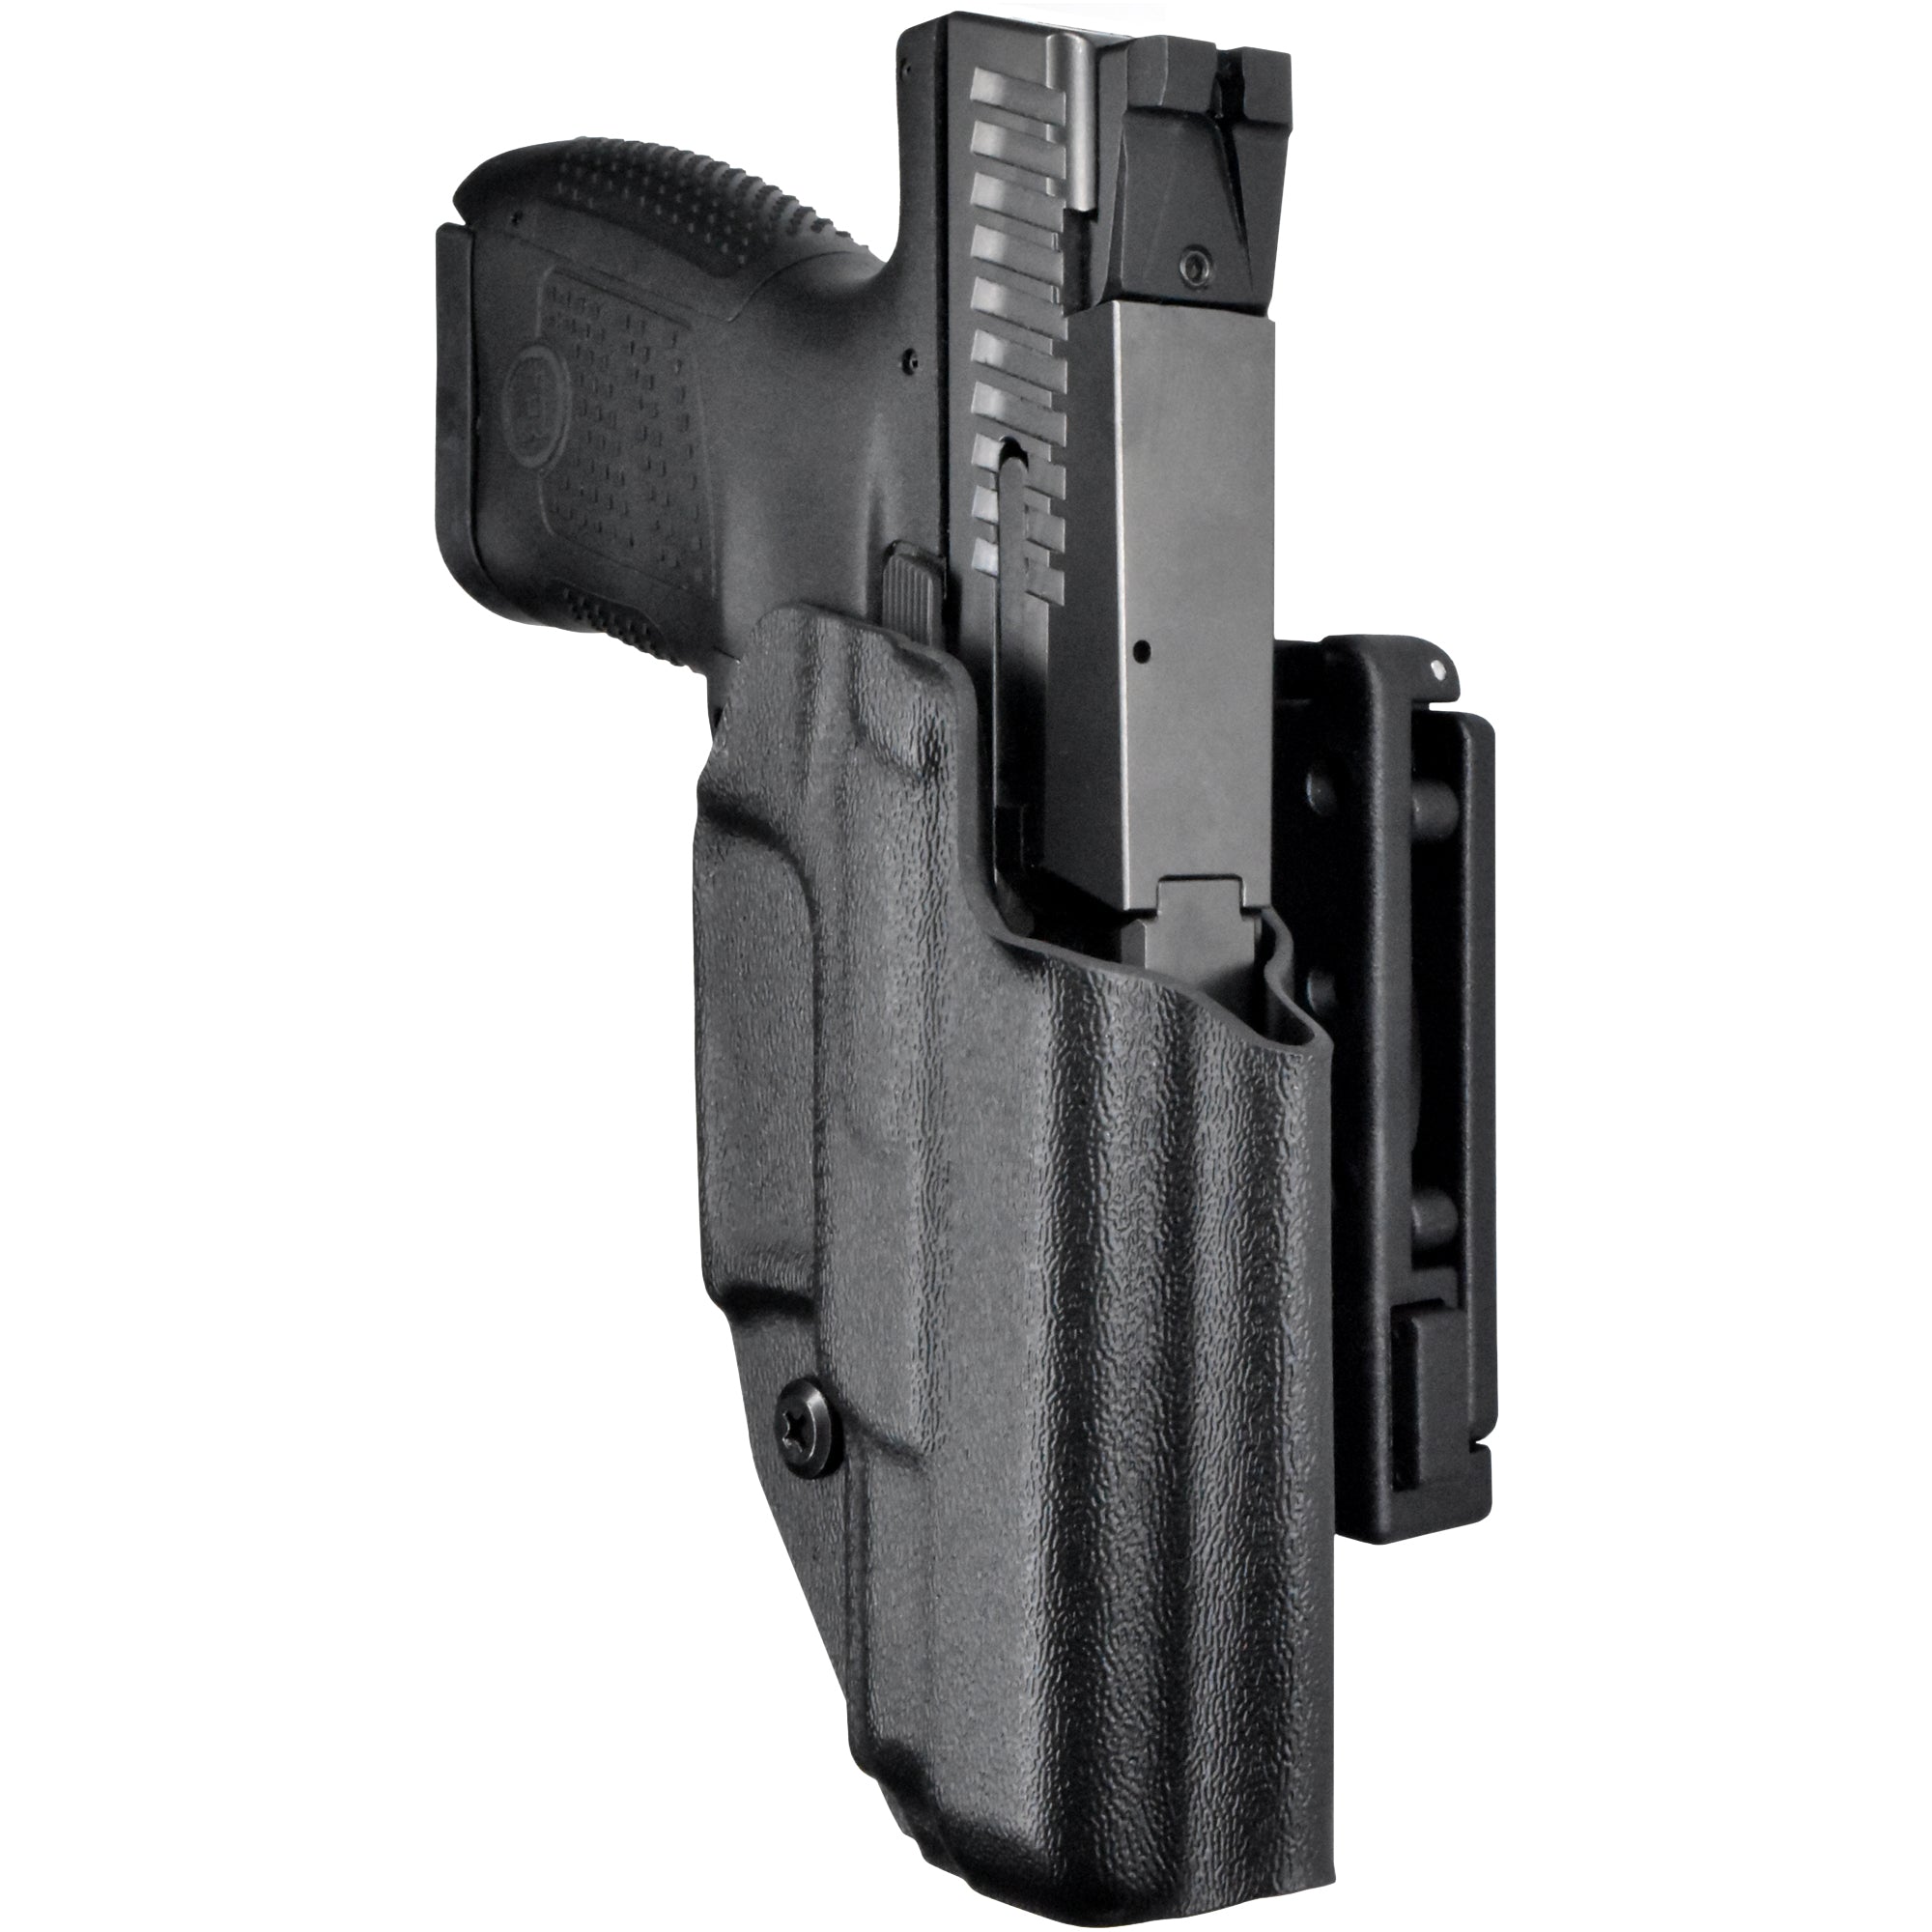 CZ P-10 S Pro IDPA Competition Holster